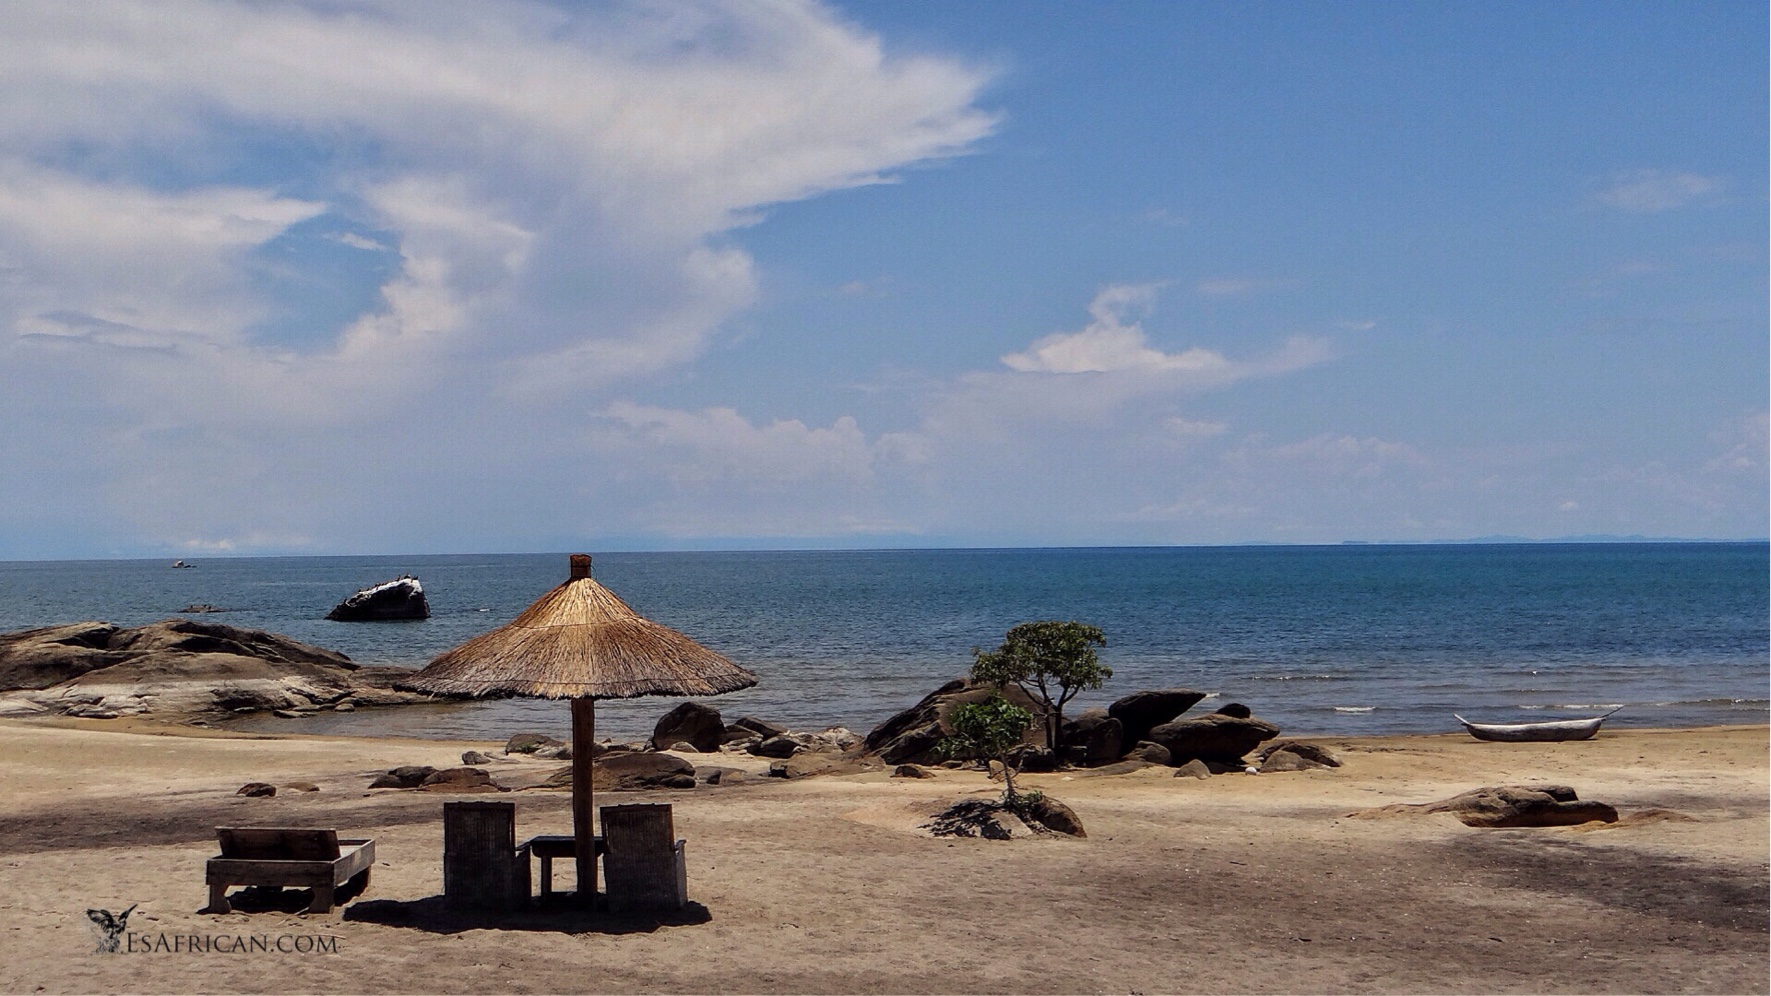 Lake Malawi: would you be willing to wait here? Perhaps this is where we like to take our time. Maybe we are rushing to get here. Others may not have the Lake on their schedule and are looking forward to time spent with you.